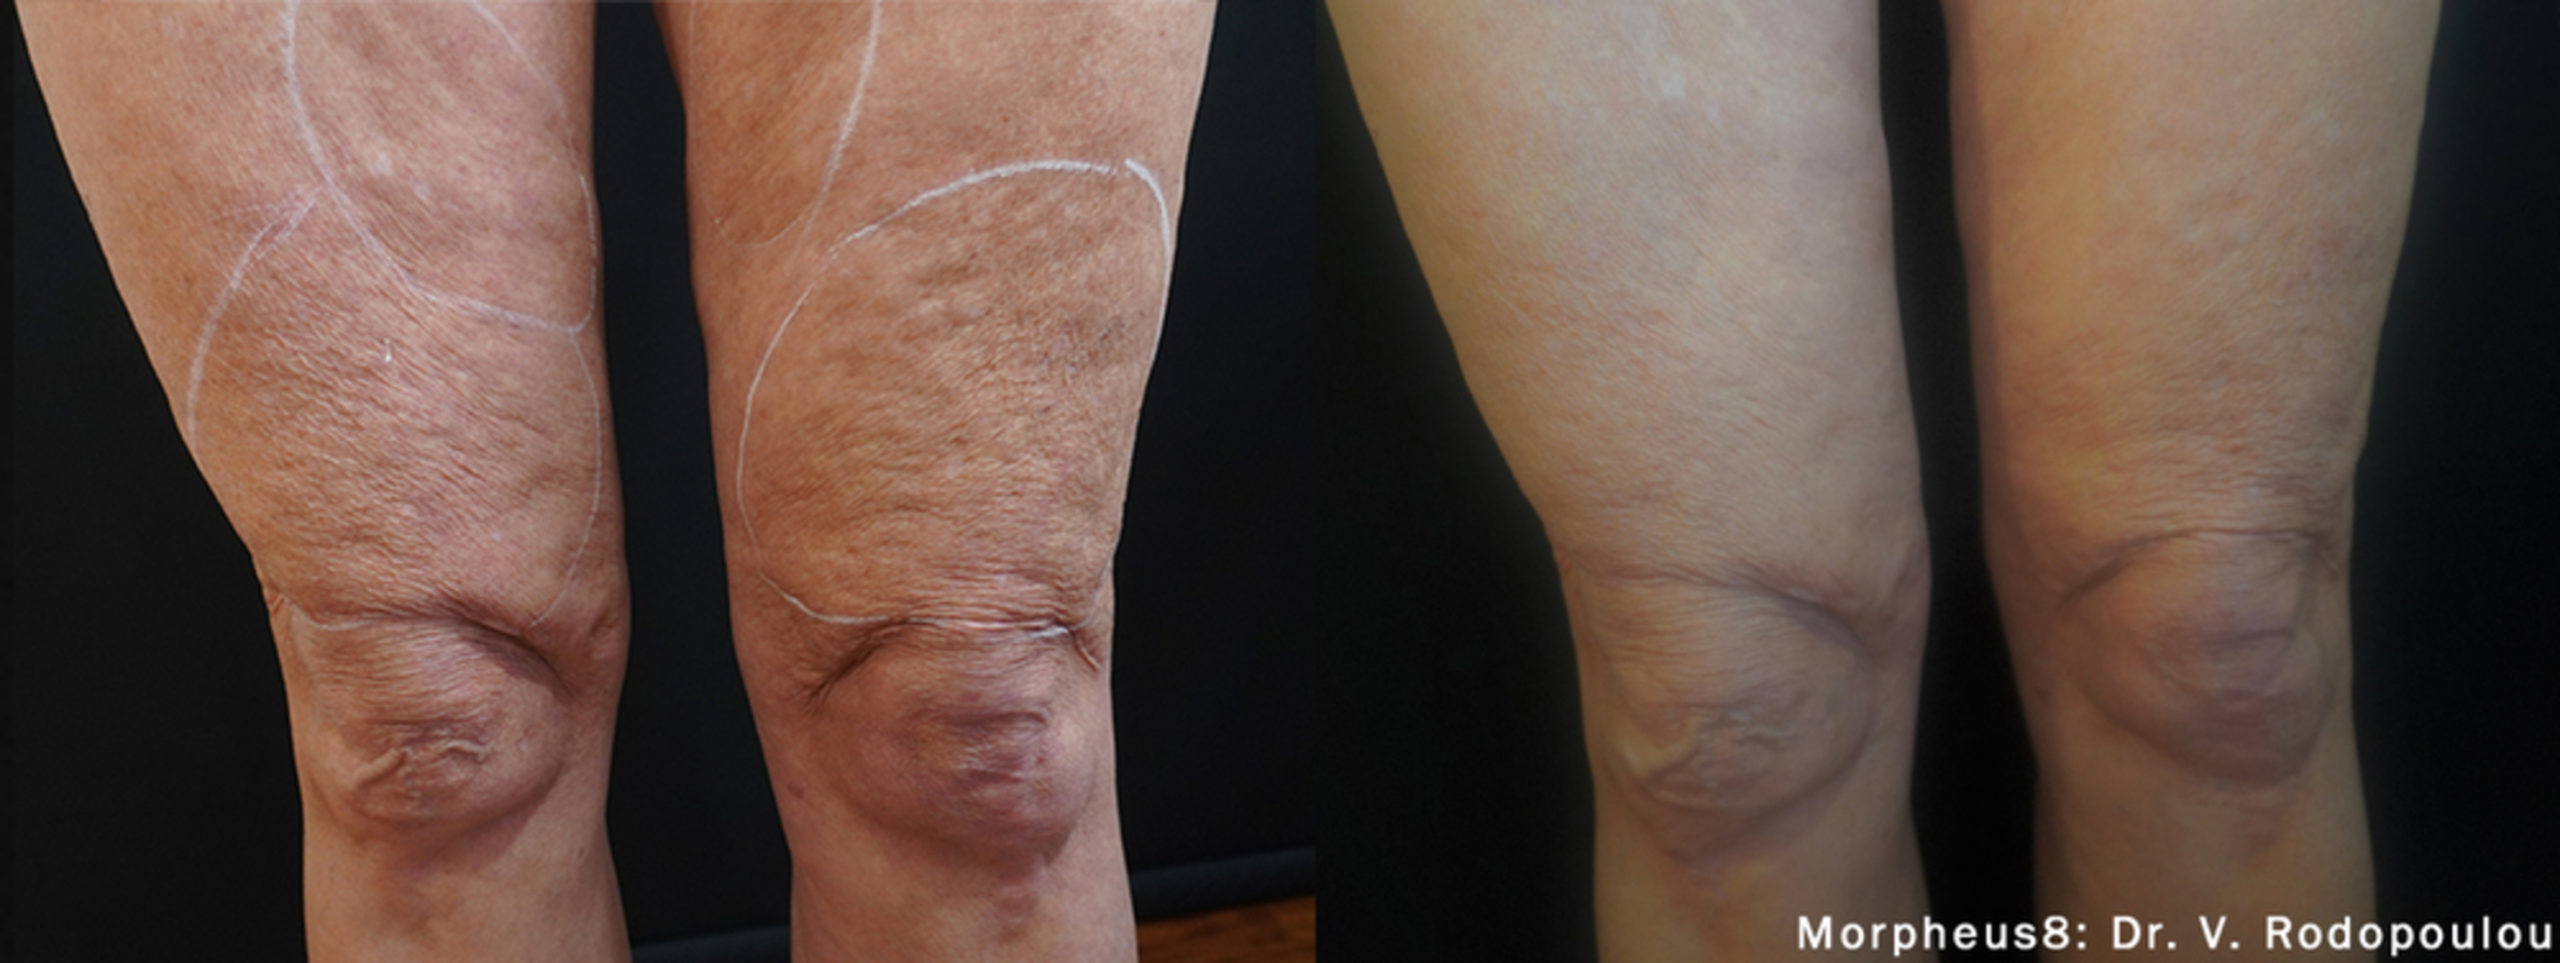 Morpheus8 skin tightening treatment on knee and thigh before and after